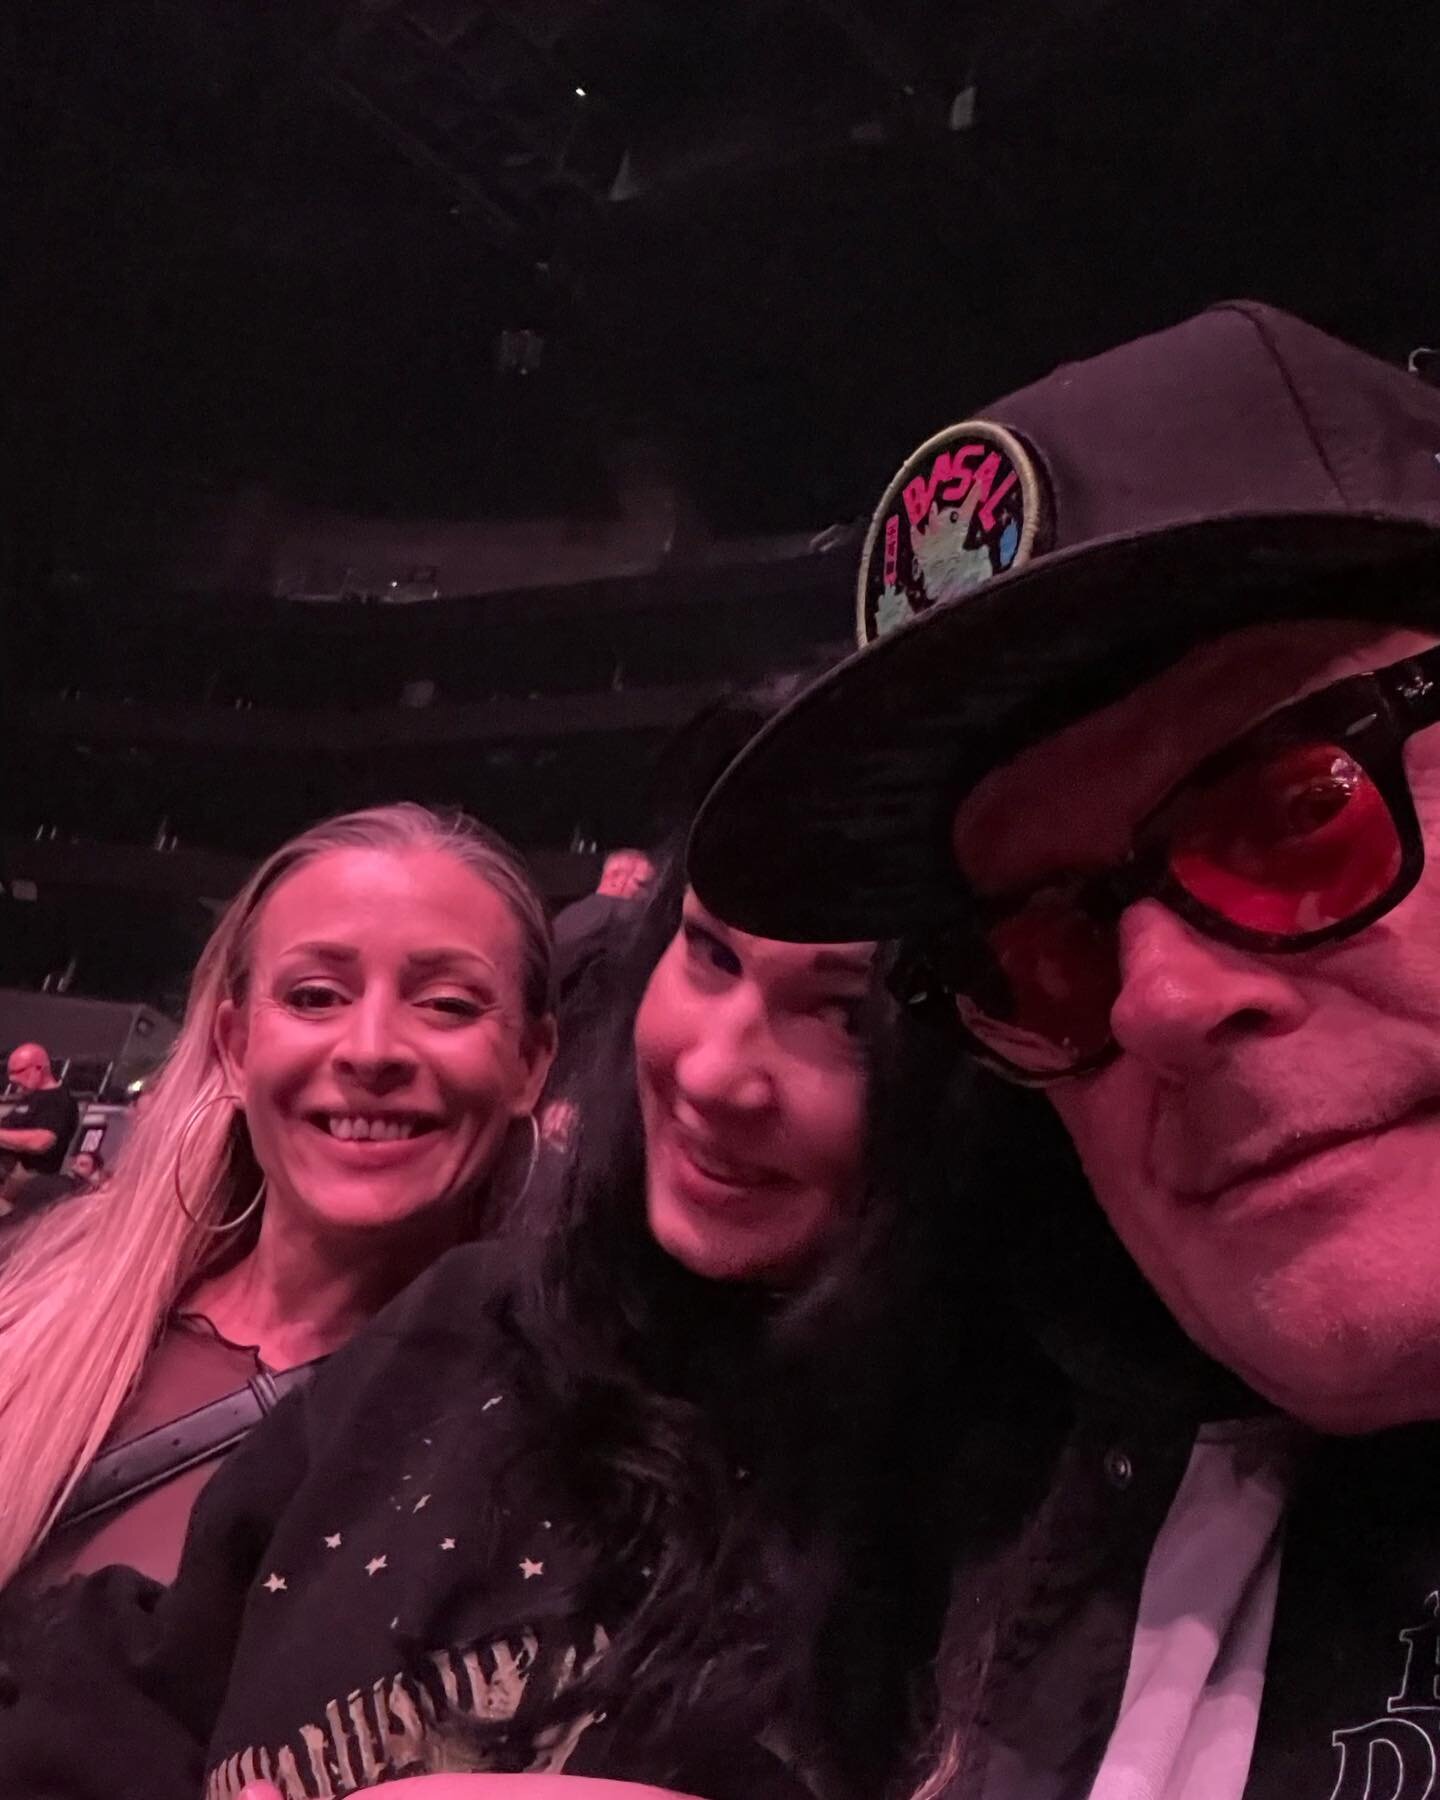 Tool tonight in Los Angeles ! Absolute gold ! Dc with the mvp ❤️❤️